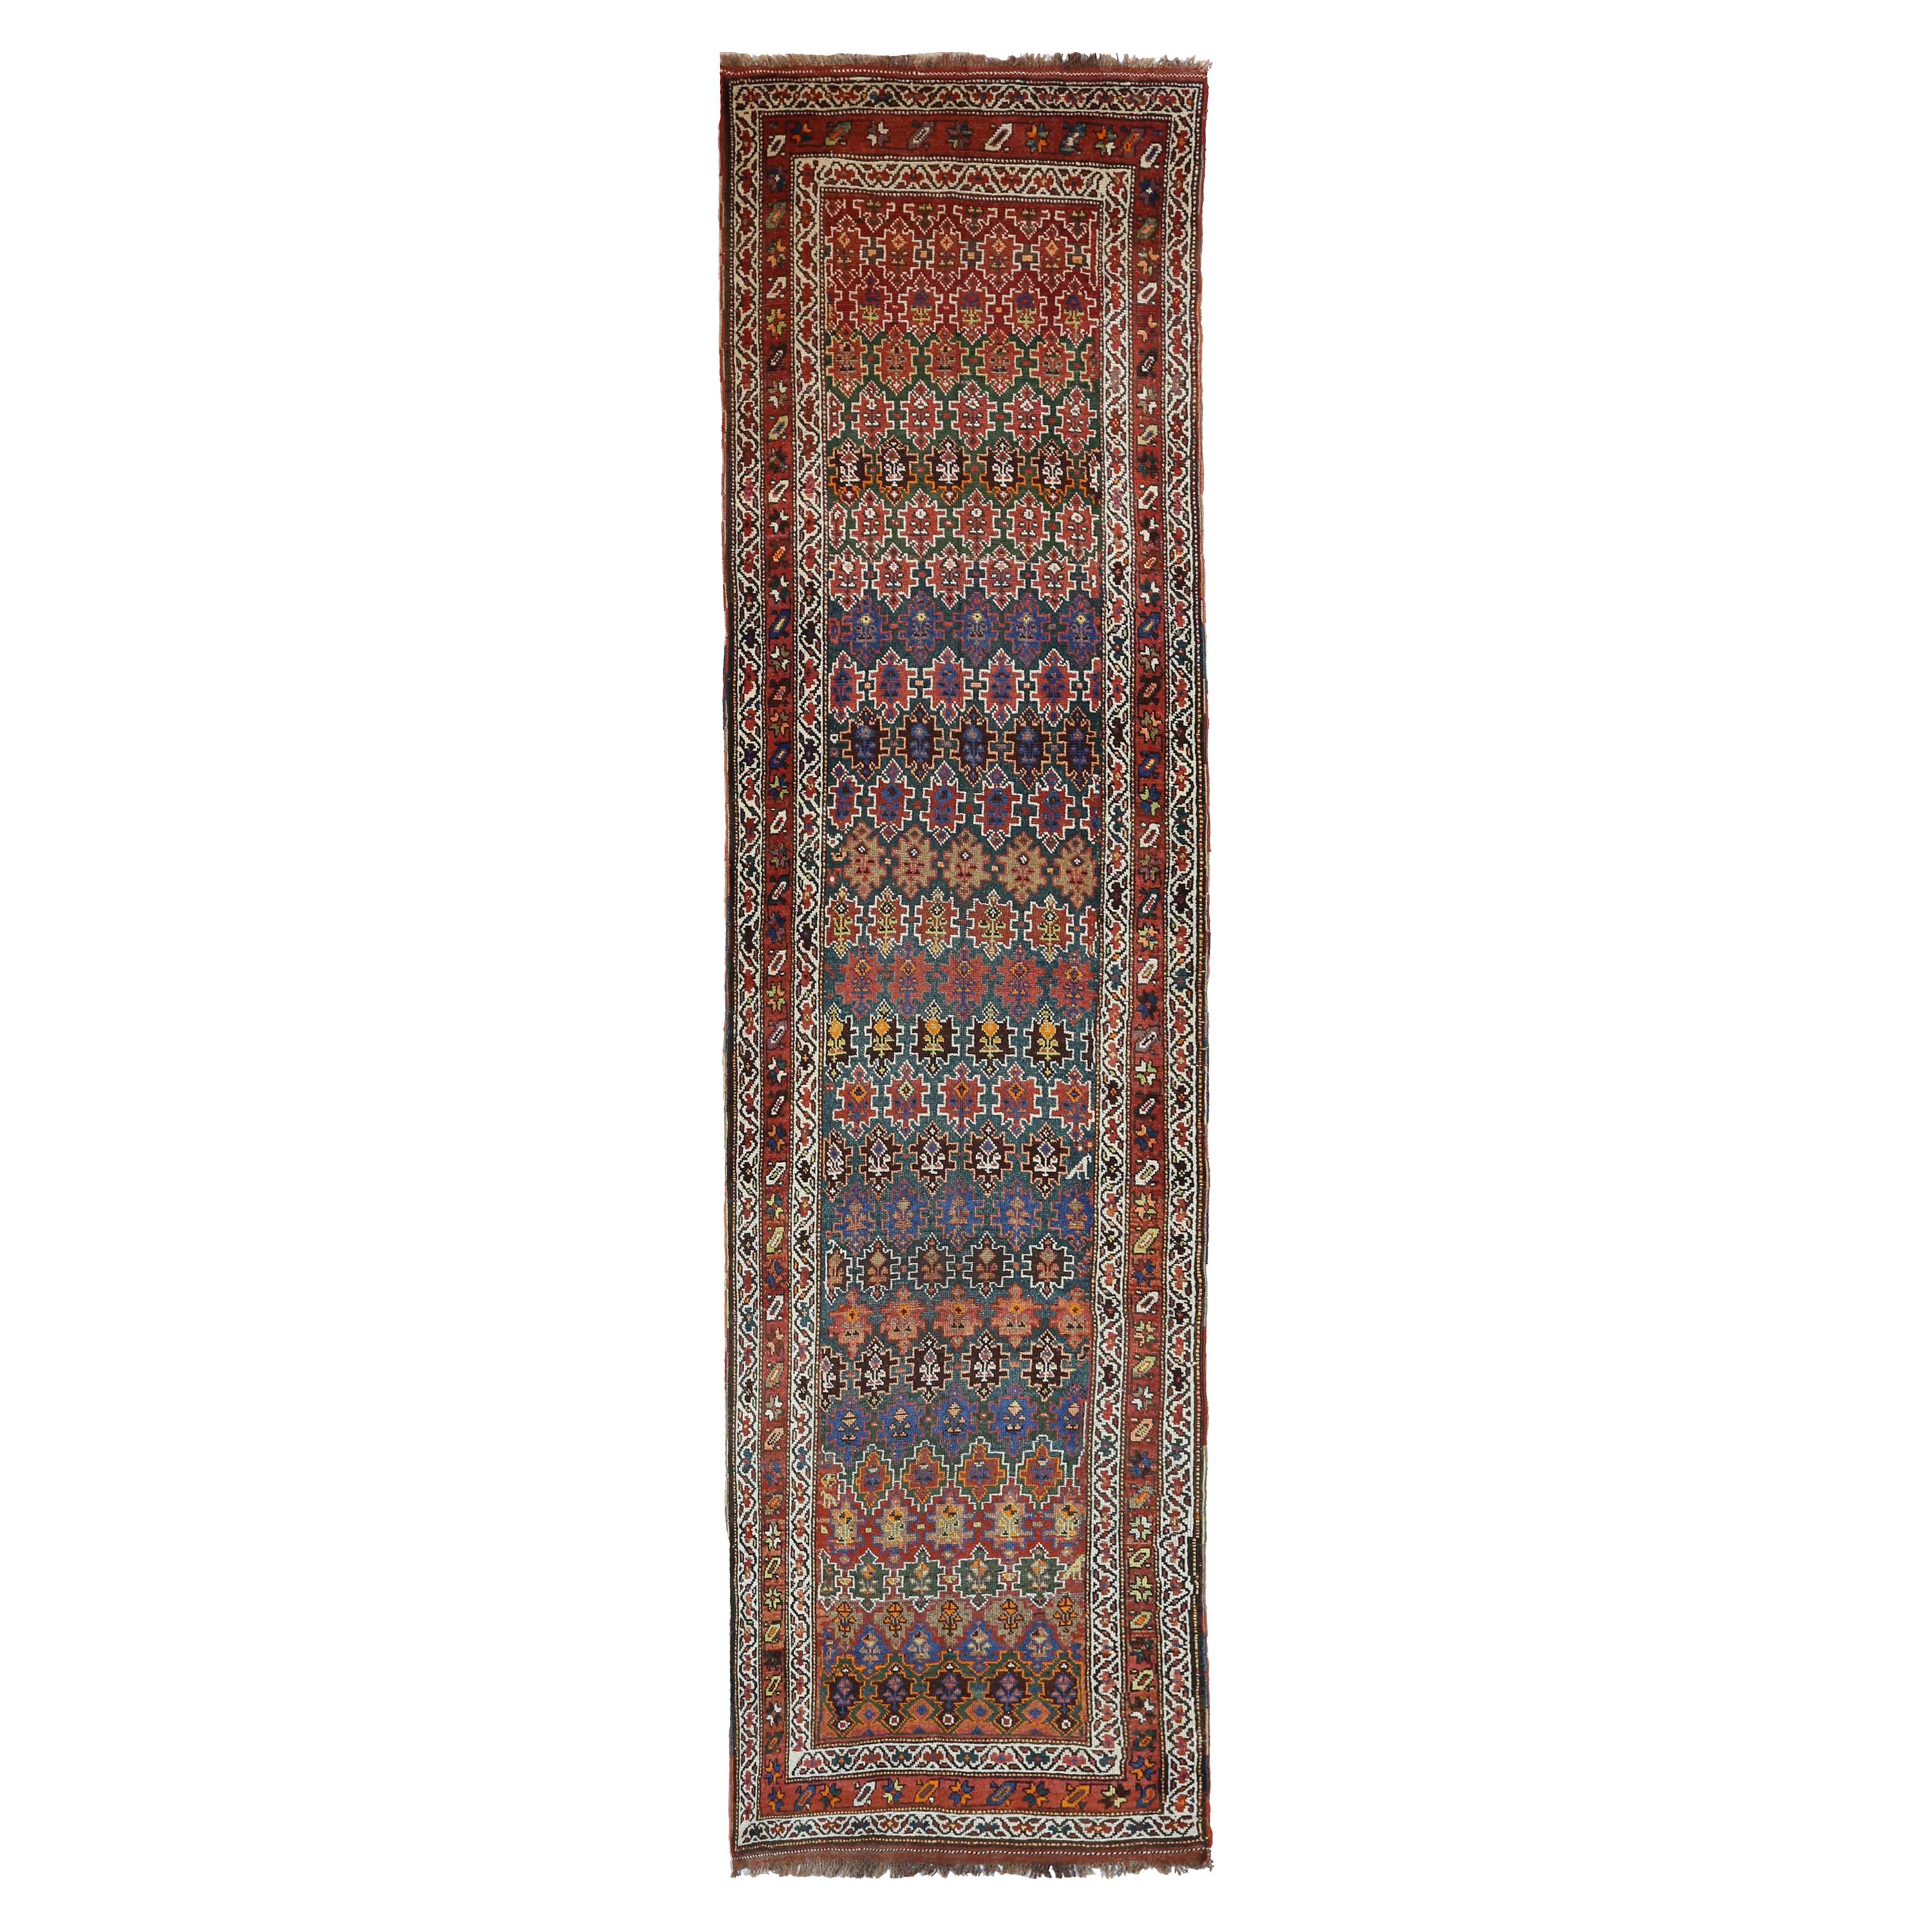 Antique Persian Rug Azerbaijan Design with Vibrant Tribal Patterns, circa 1920s For Sale